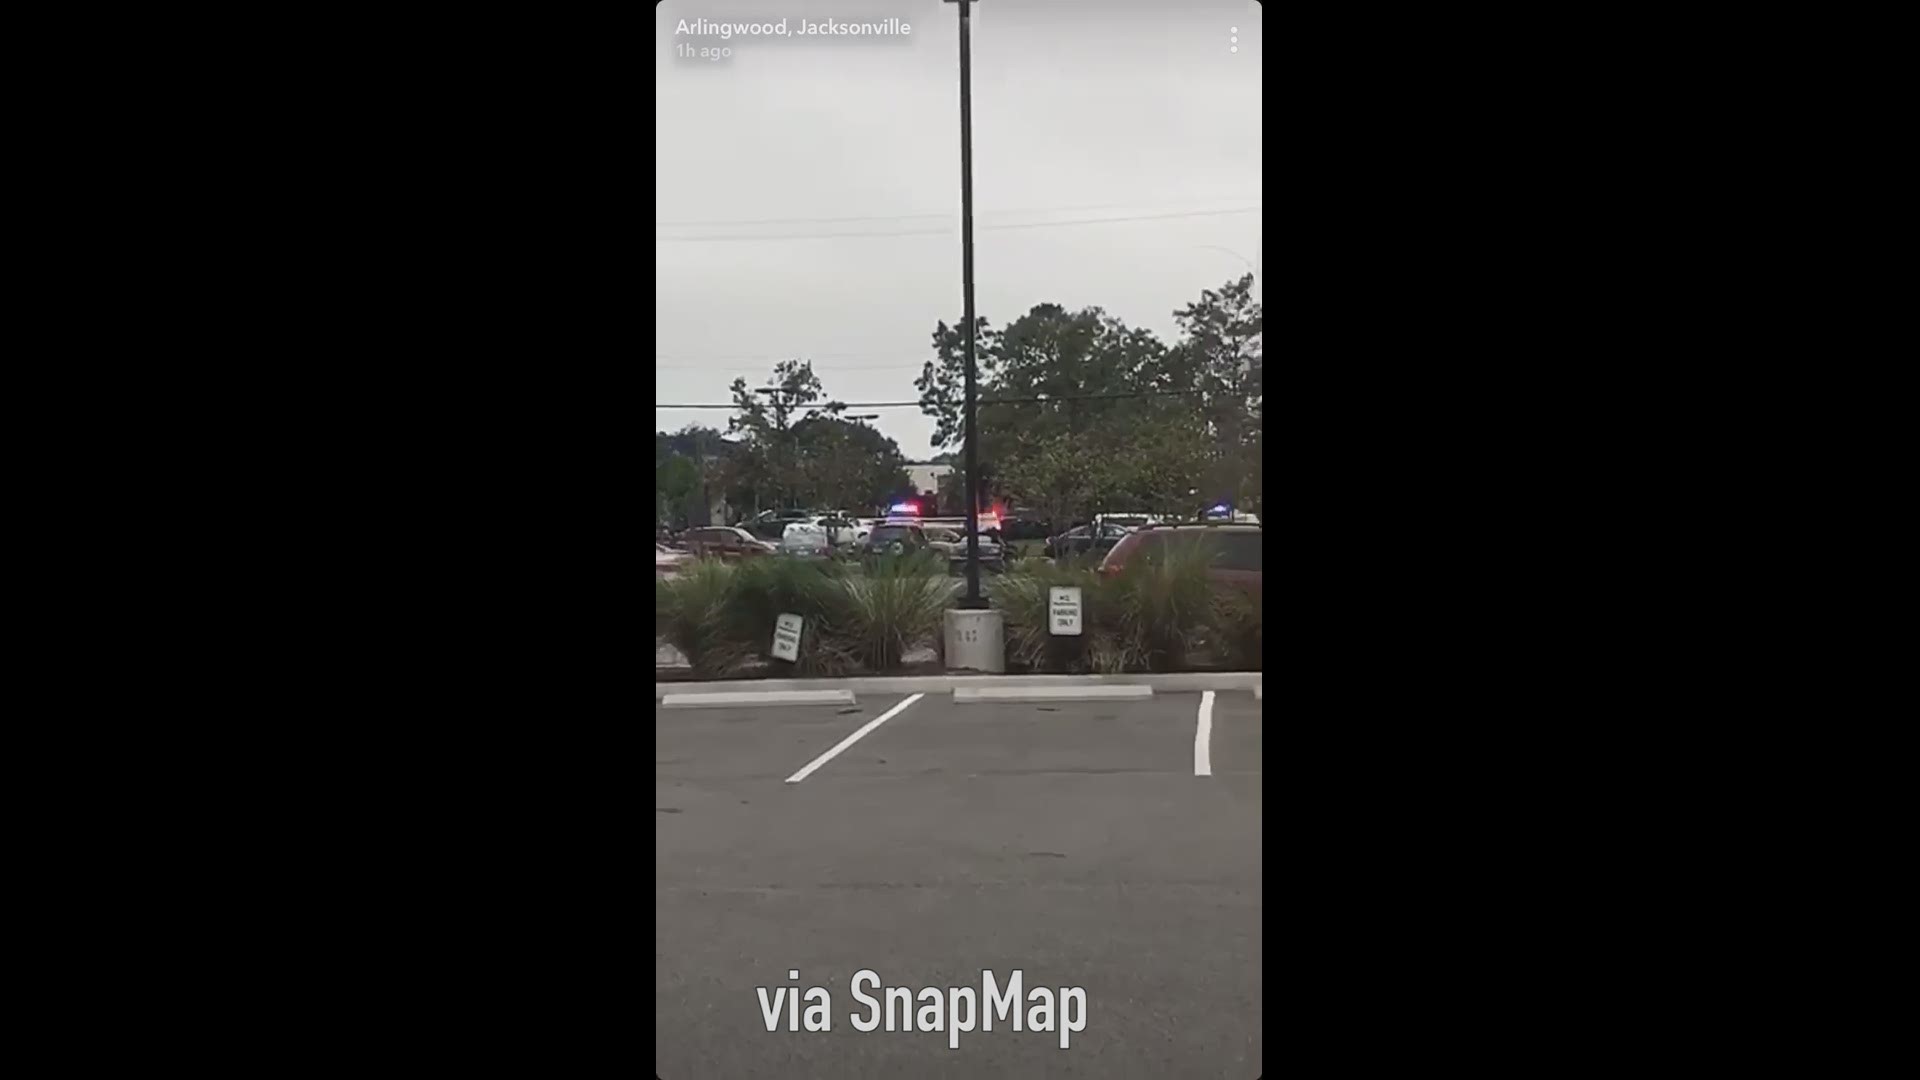 WATCH ' SnapMap video shows heavy police presence on Merrill Road